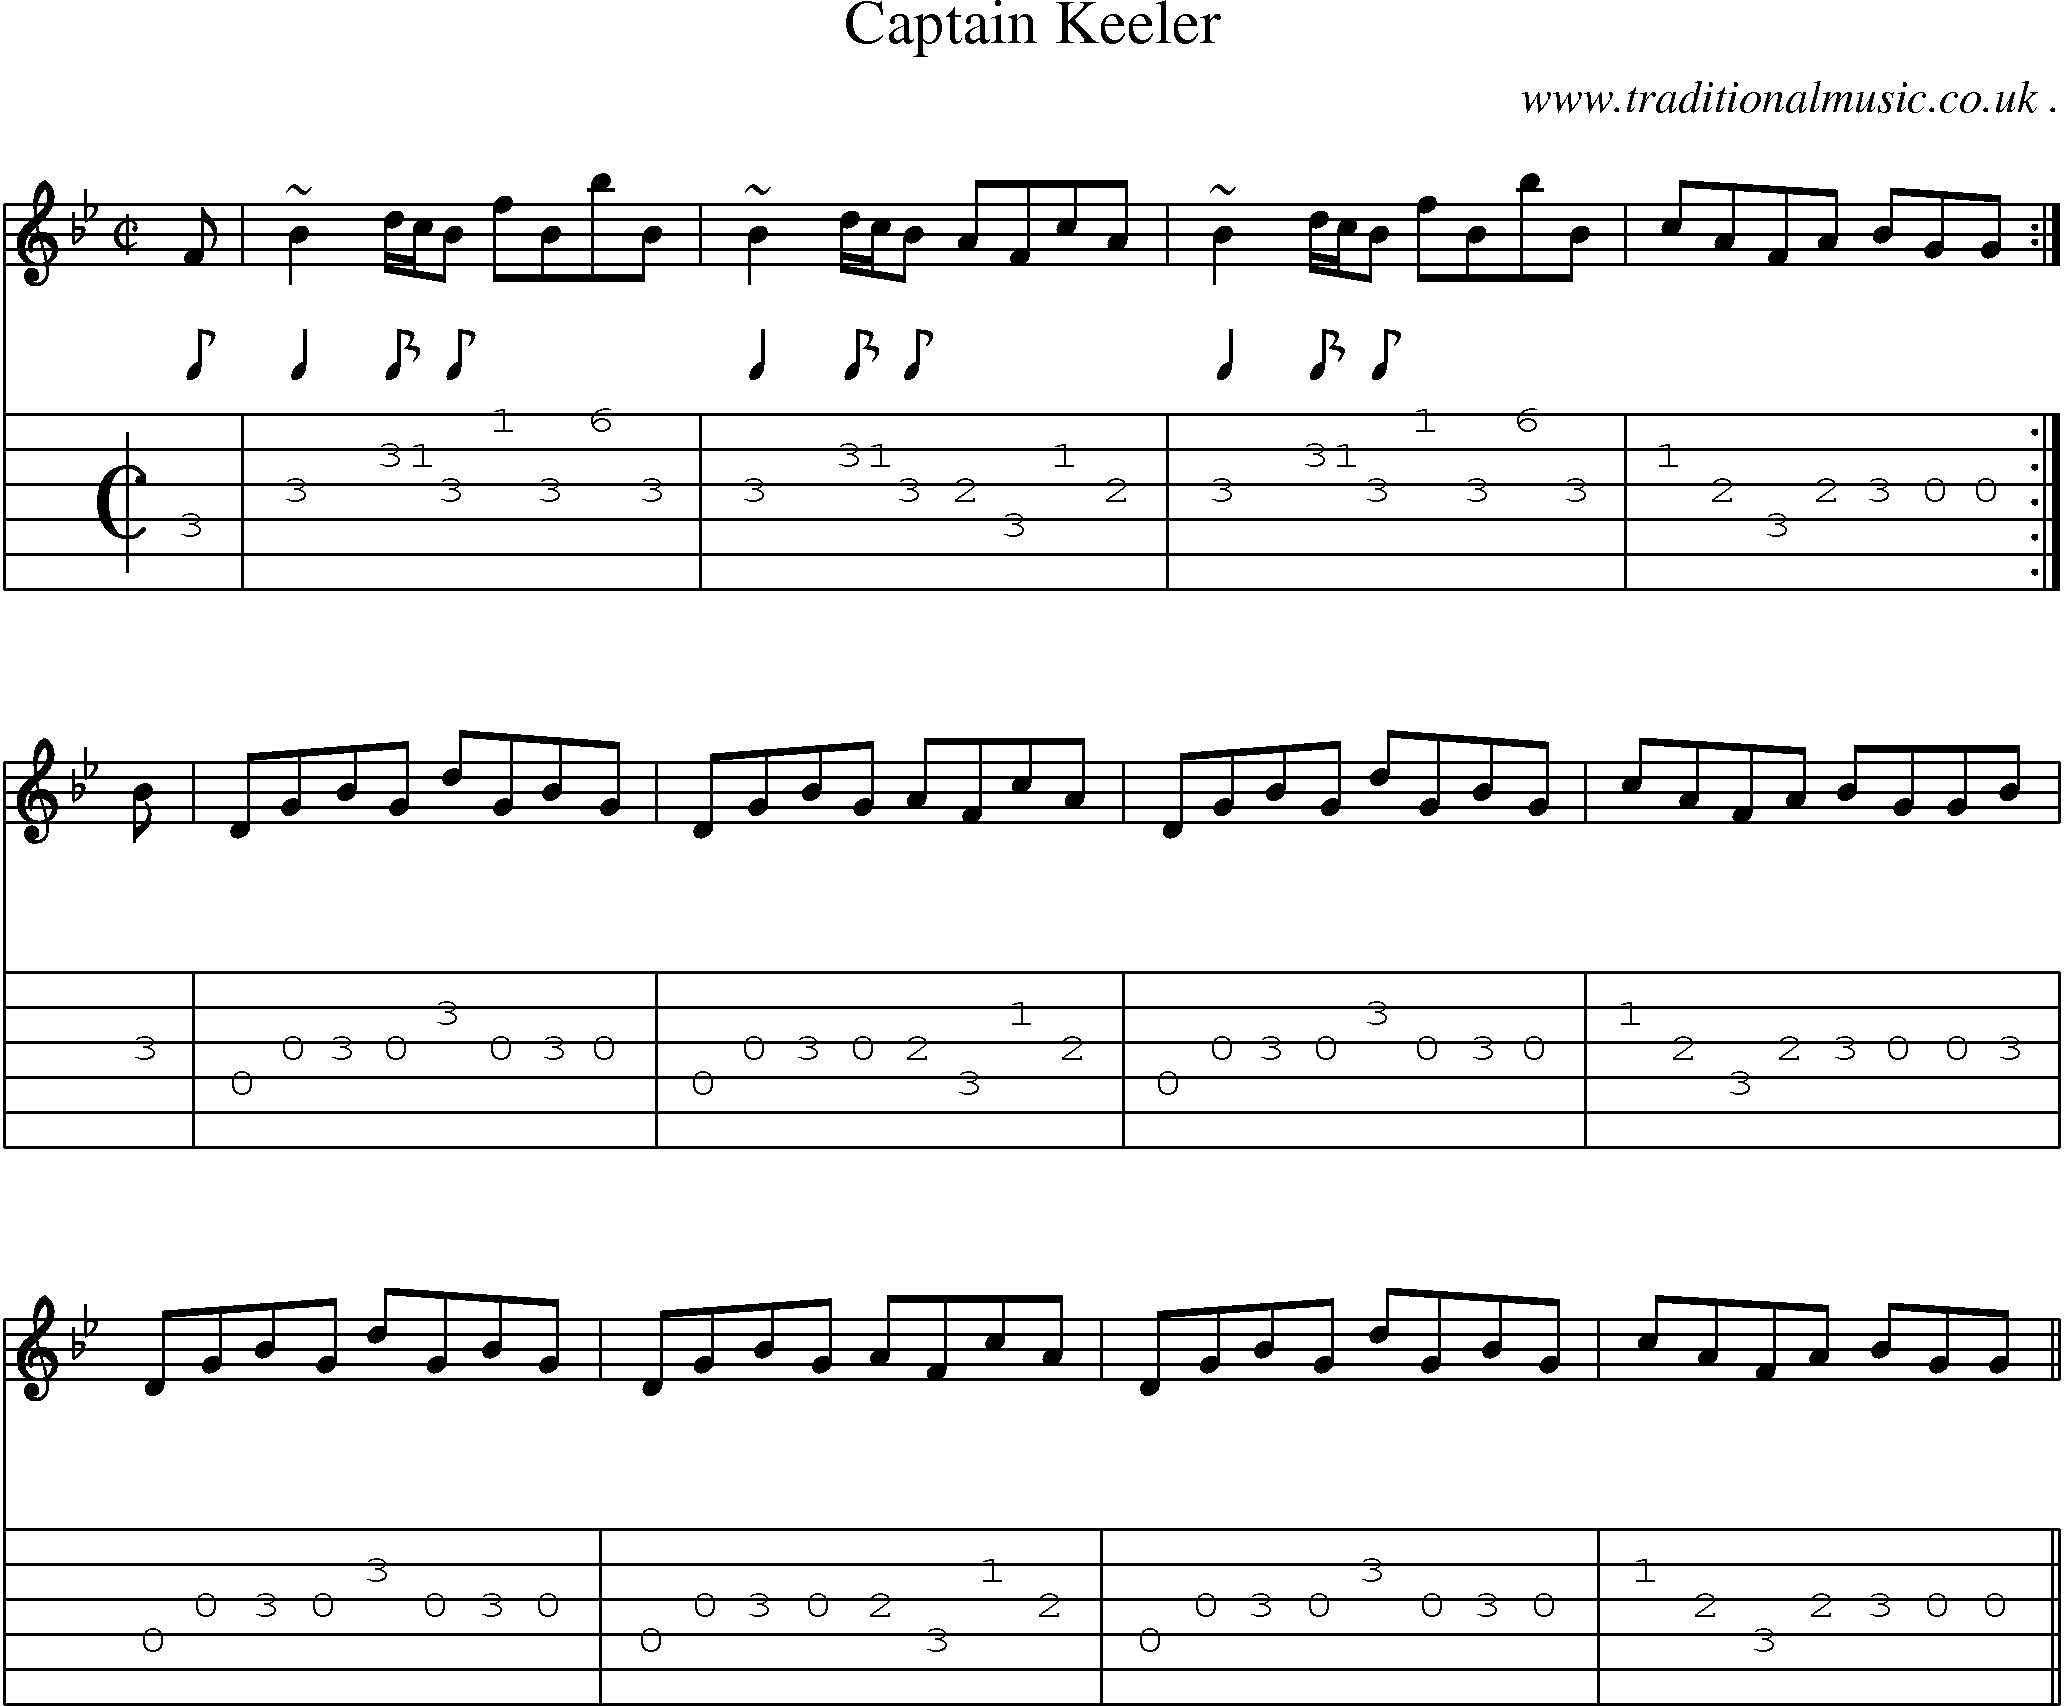 Sheet-music  score, Chords and Guitar Tabs for Captain Keeler